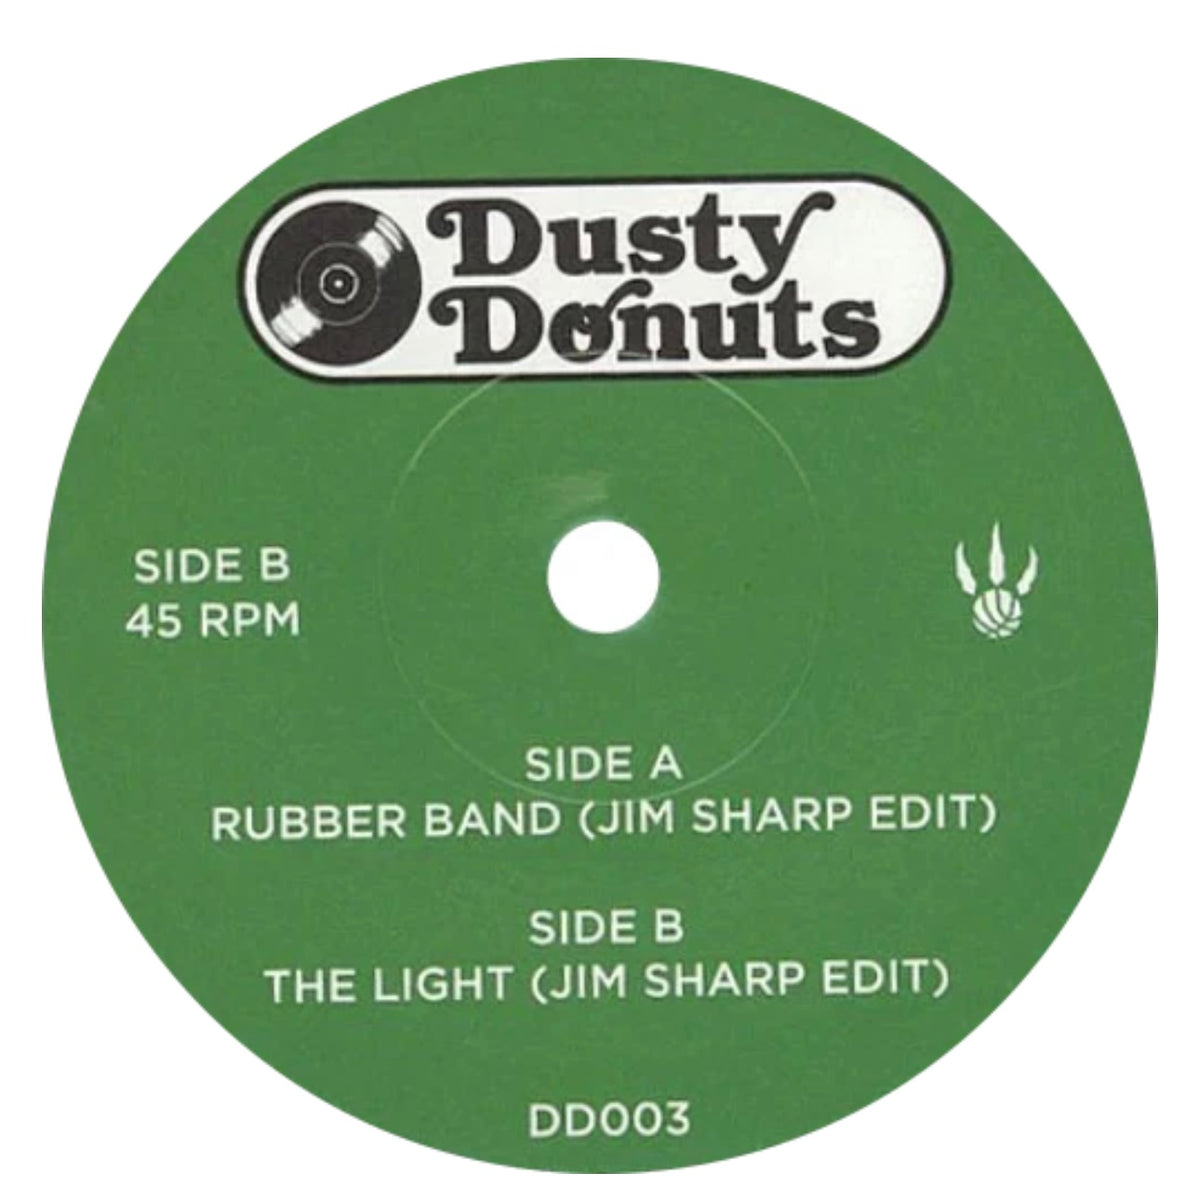 Dusty Donuts 3: Jim Sharp - Rubber Band b/w The Light